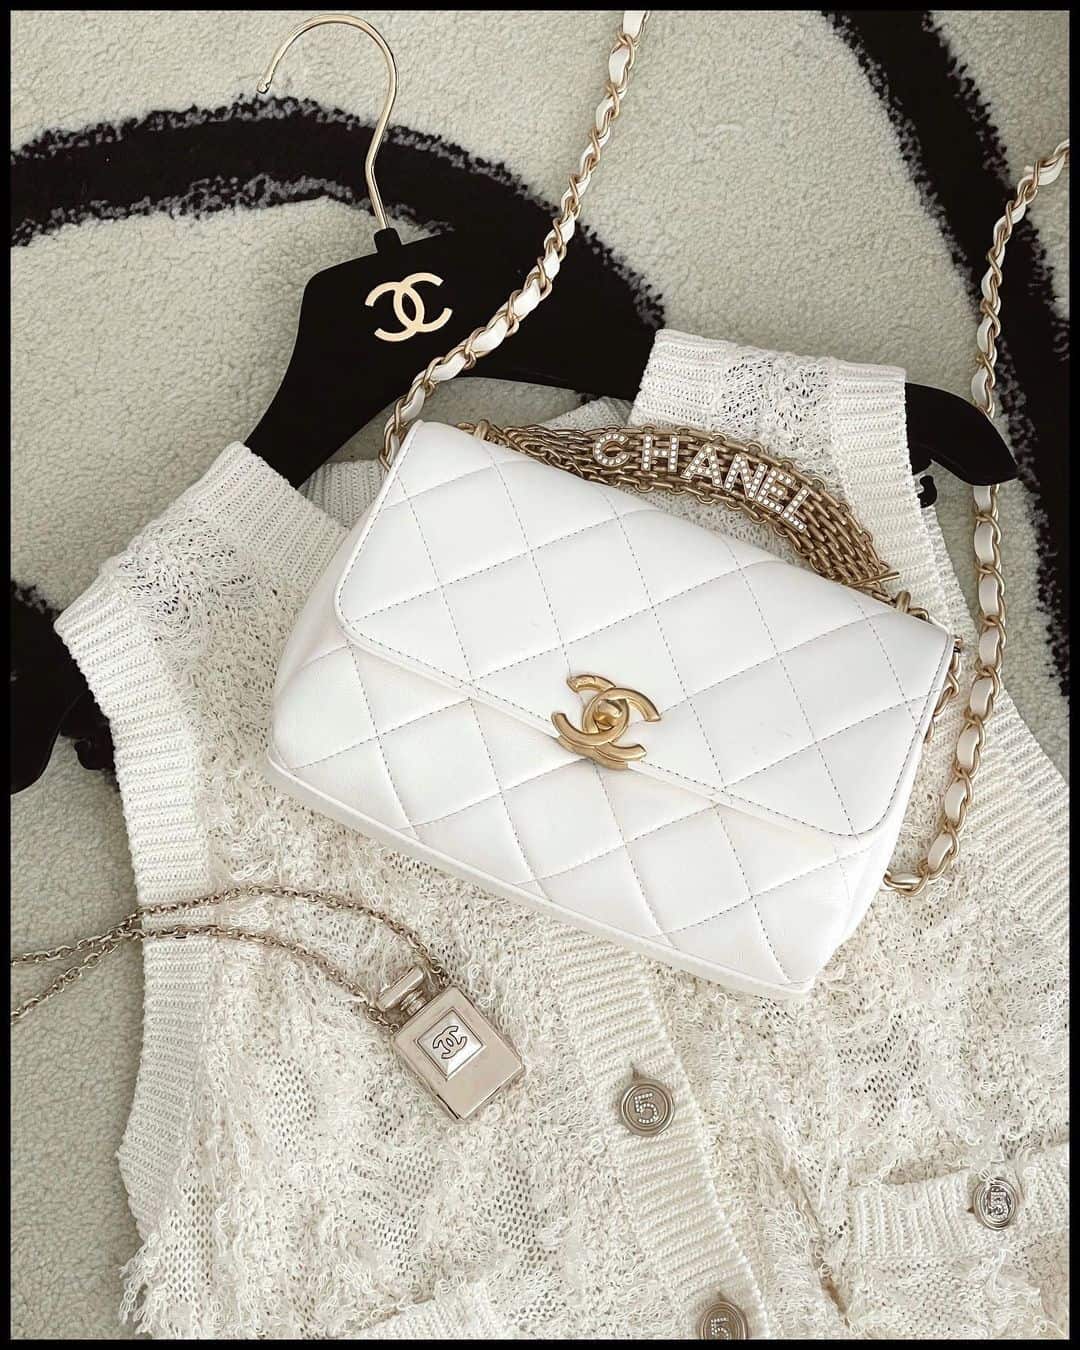 Chanel Bags price increase list in Europe